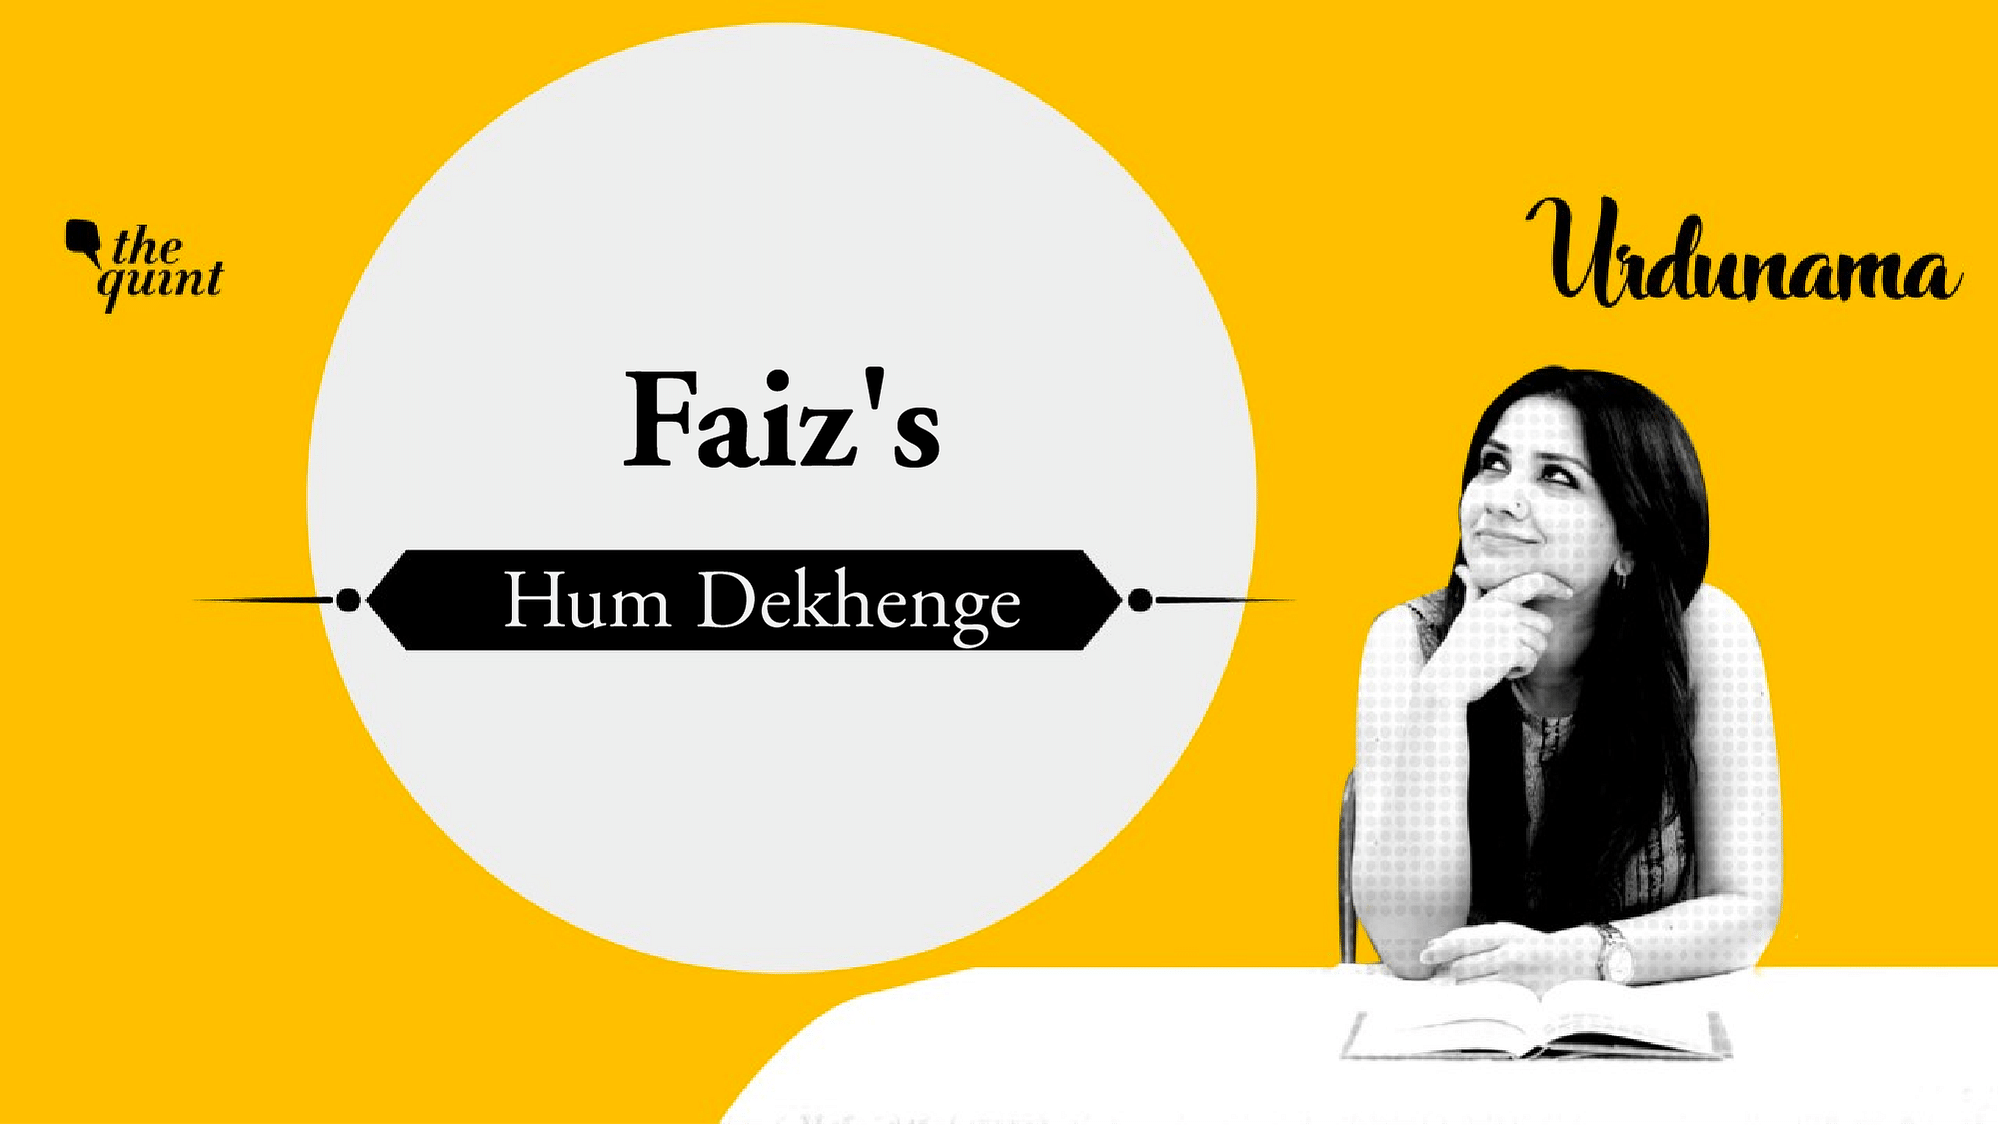 In ‘Hum Dekhenge’, Faiz not only attacks the ultra-Islamic regime of Pakistani dictator Zia-ul-Haq, but also invokes the power of the Eternal Truth and Justice. 